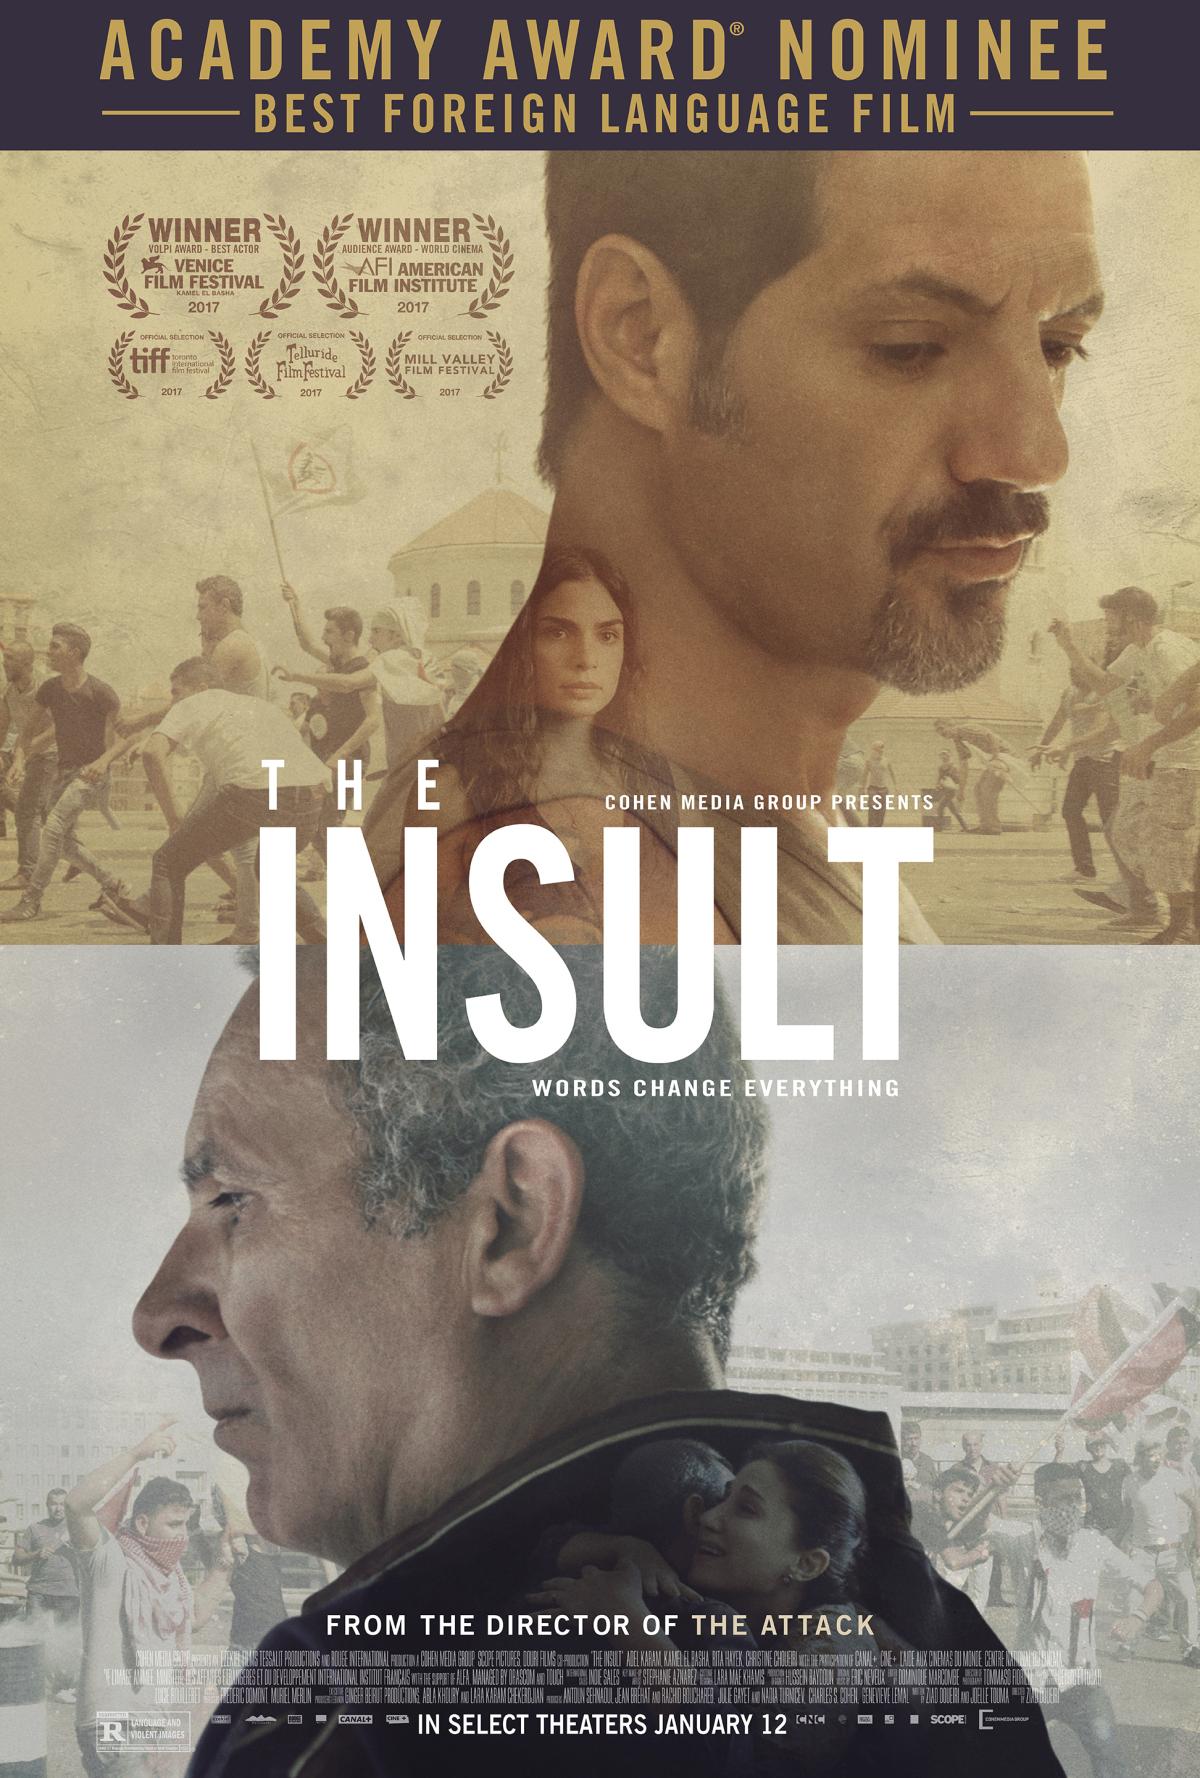 Image of the movie poster for The Insult (Arabic) 2017